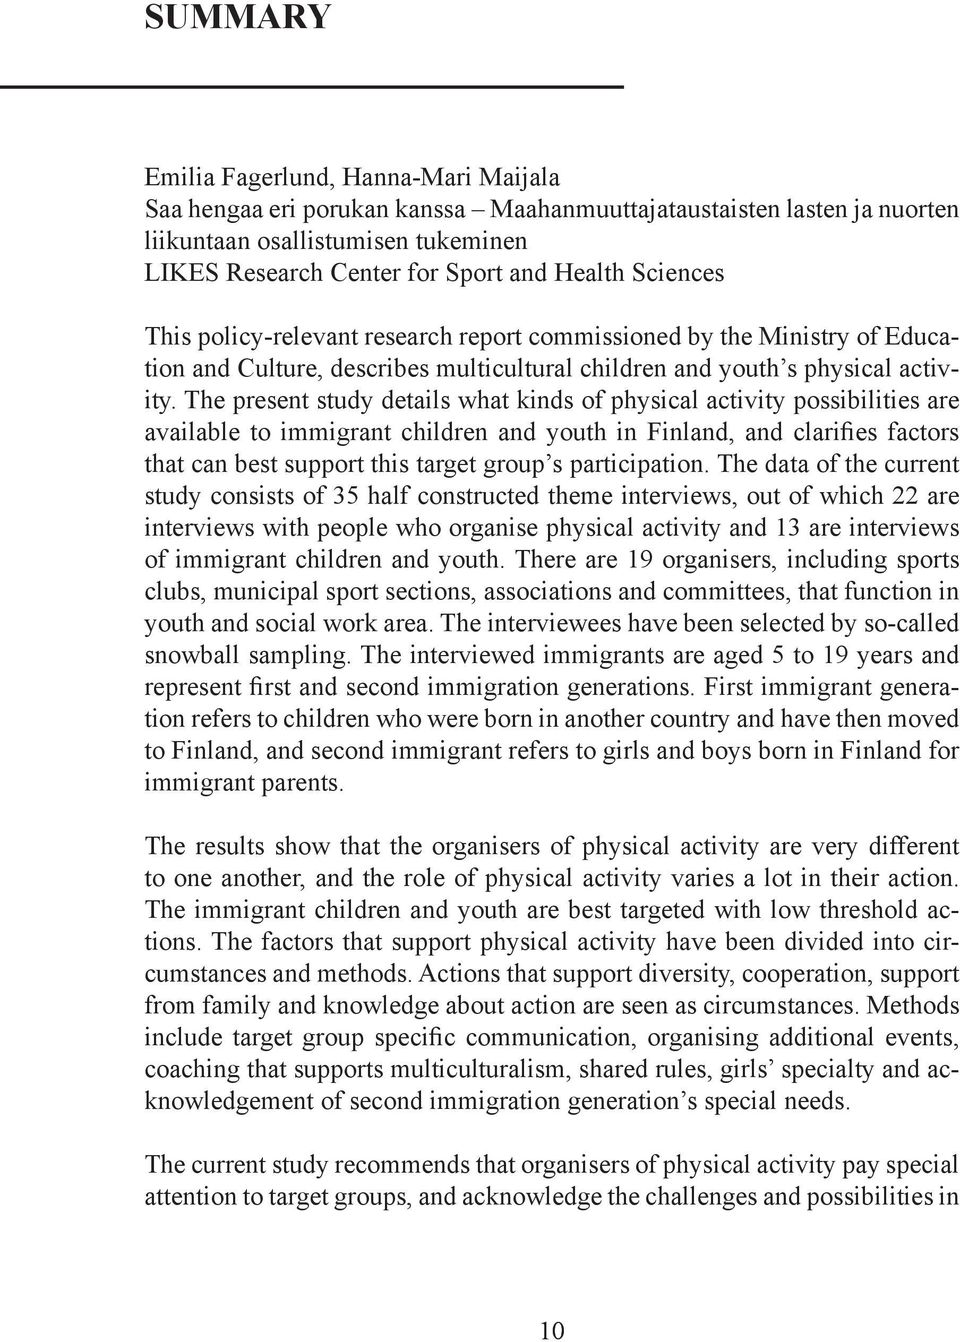 The present study details what kinds of physical activity possibilities are available to immigrant children and youth in Finland, and clarifies factors that can best support this target group s